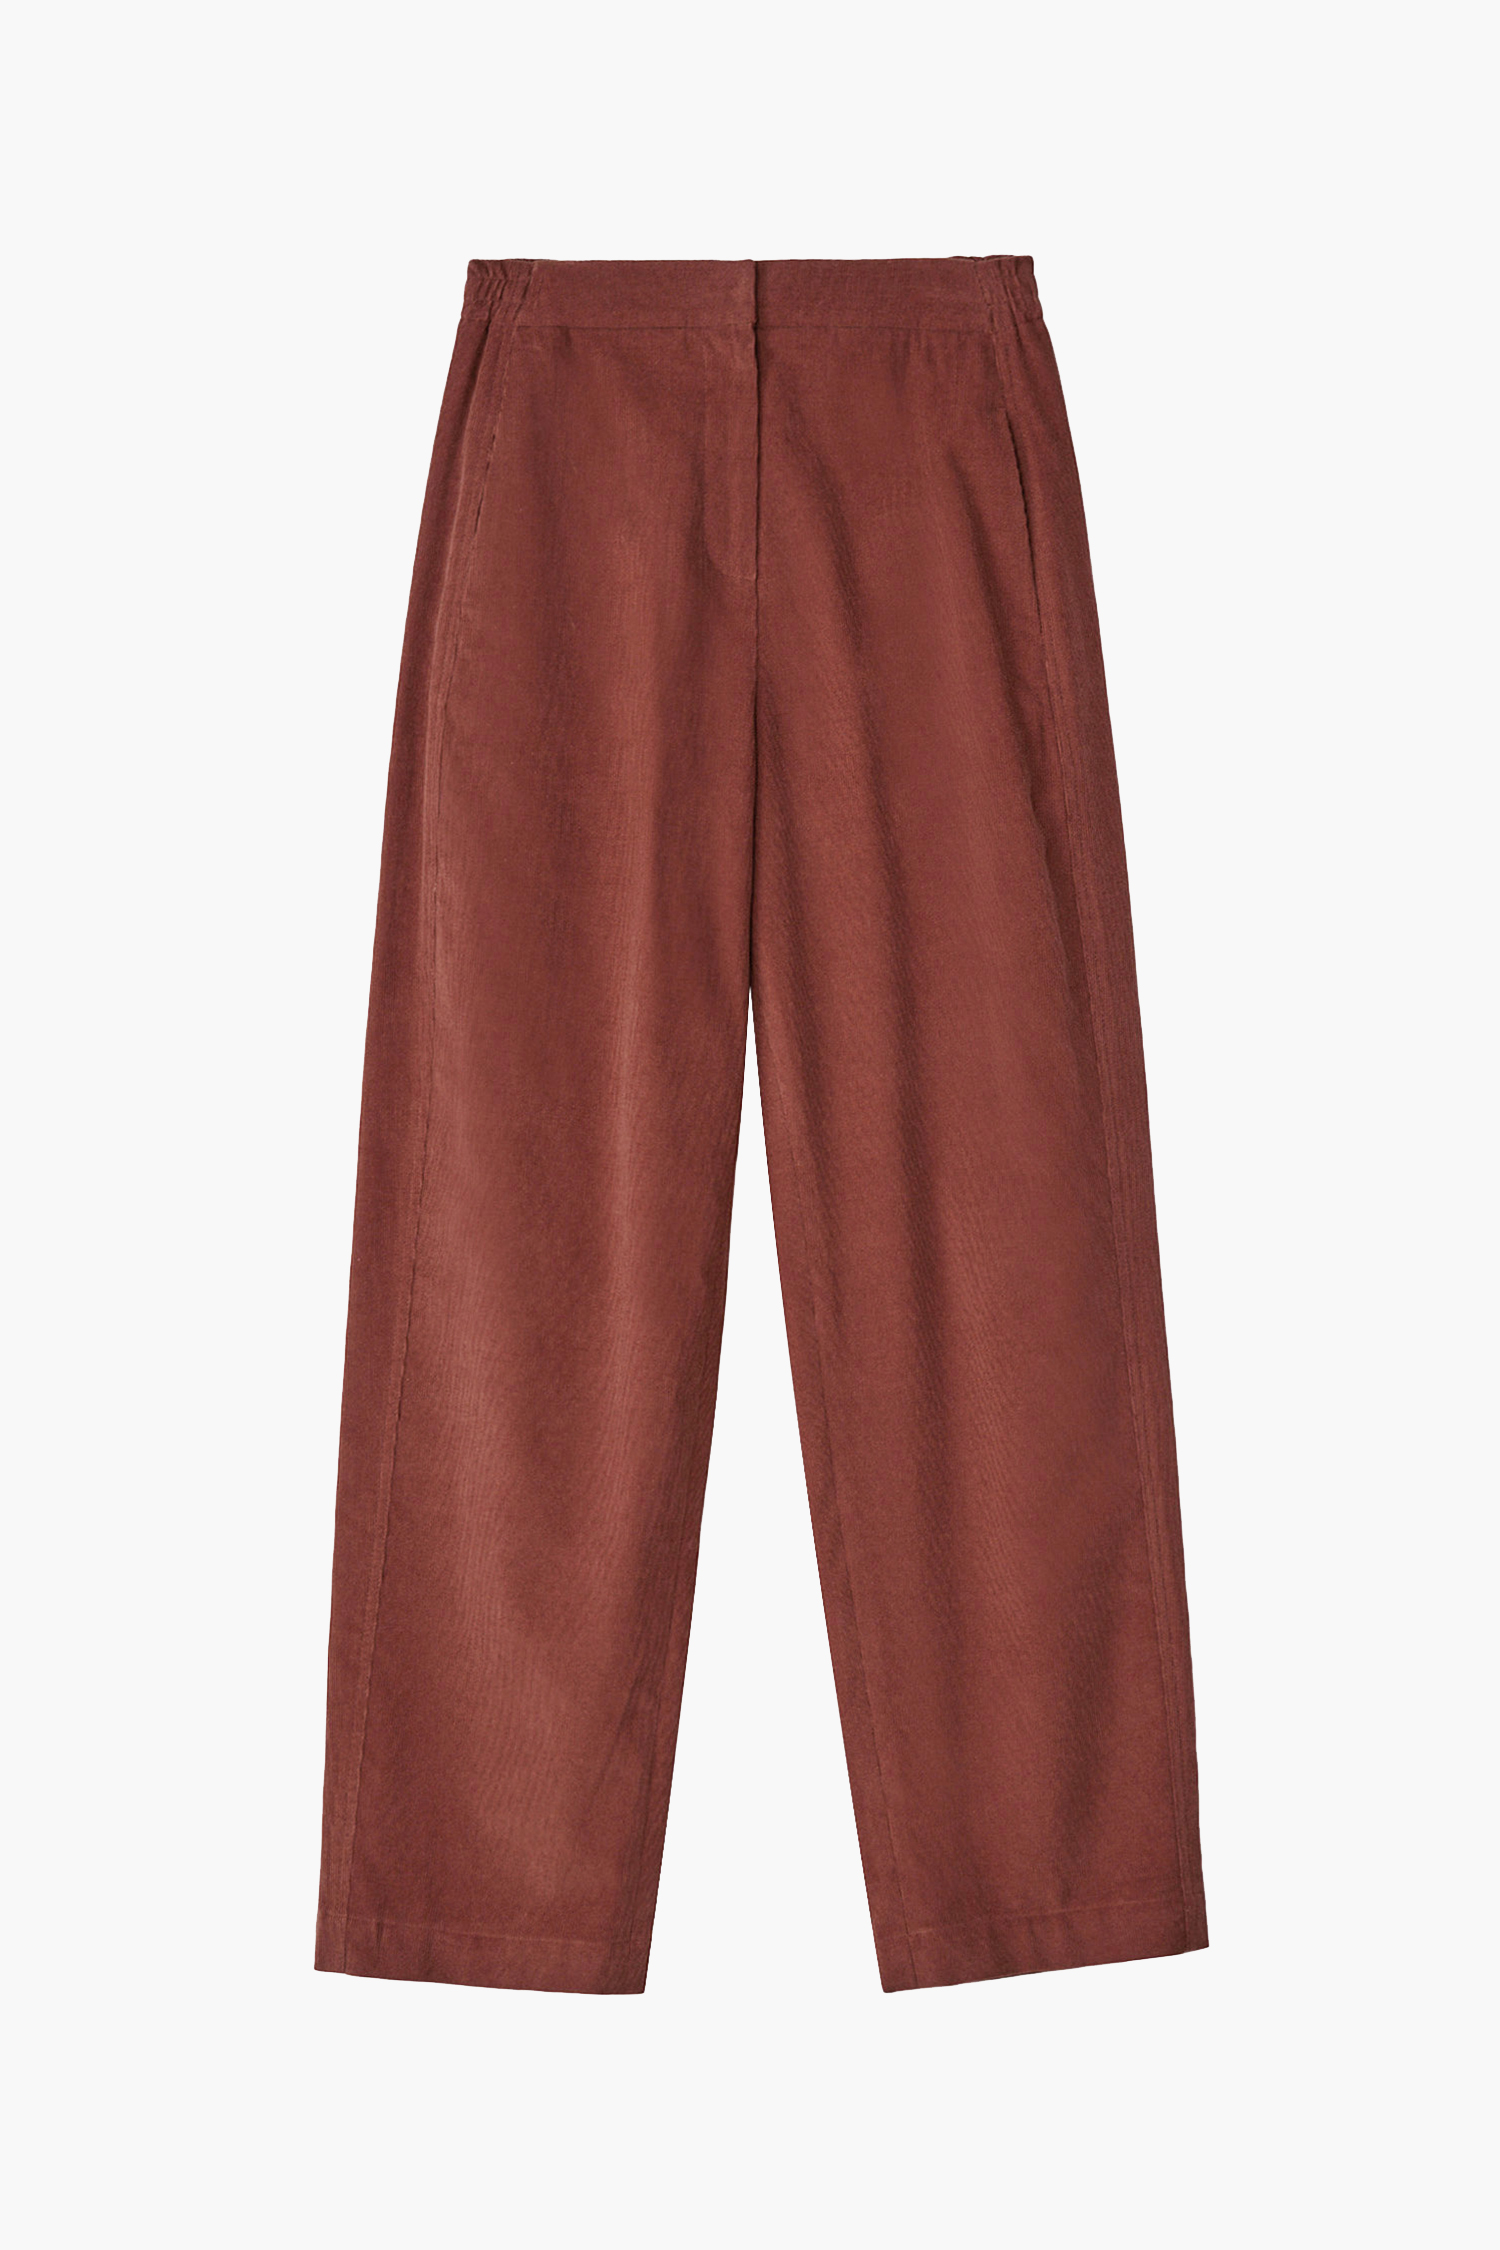 COURDUROY WIDE PANT - RED